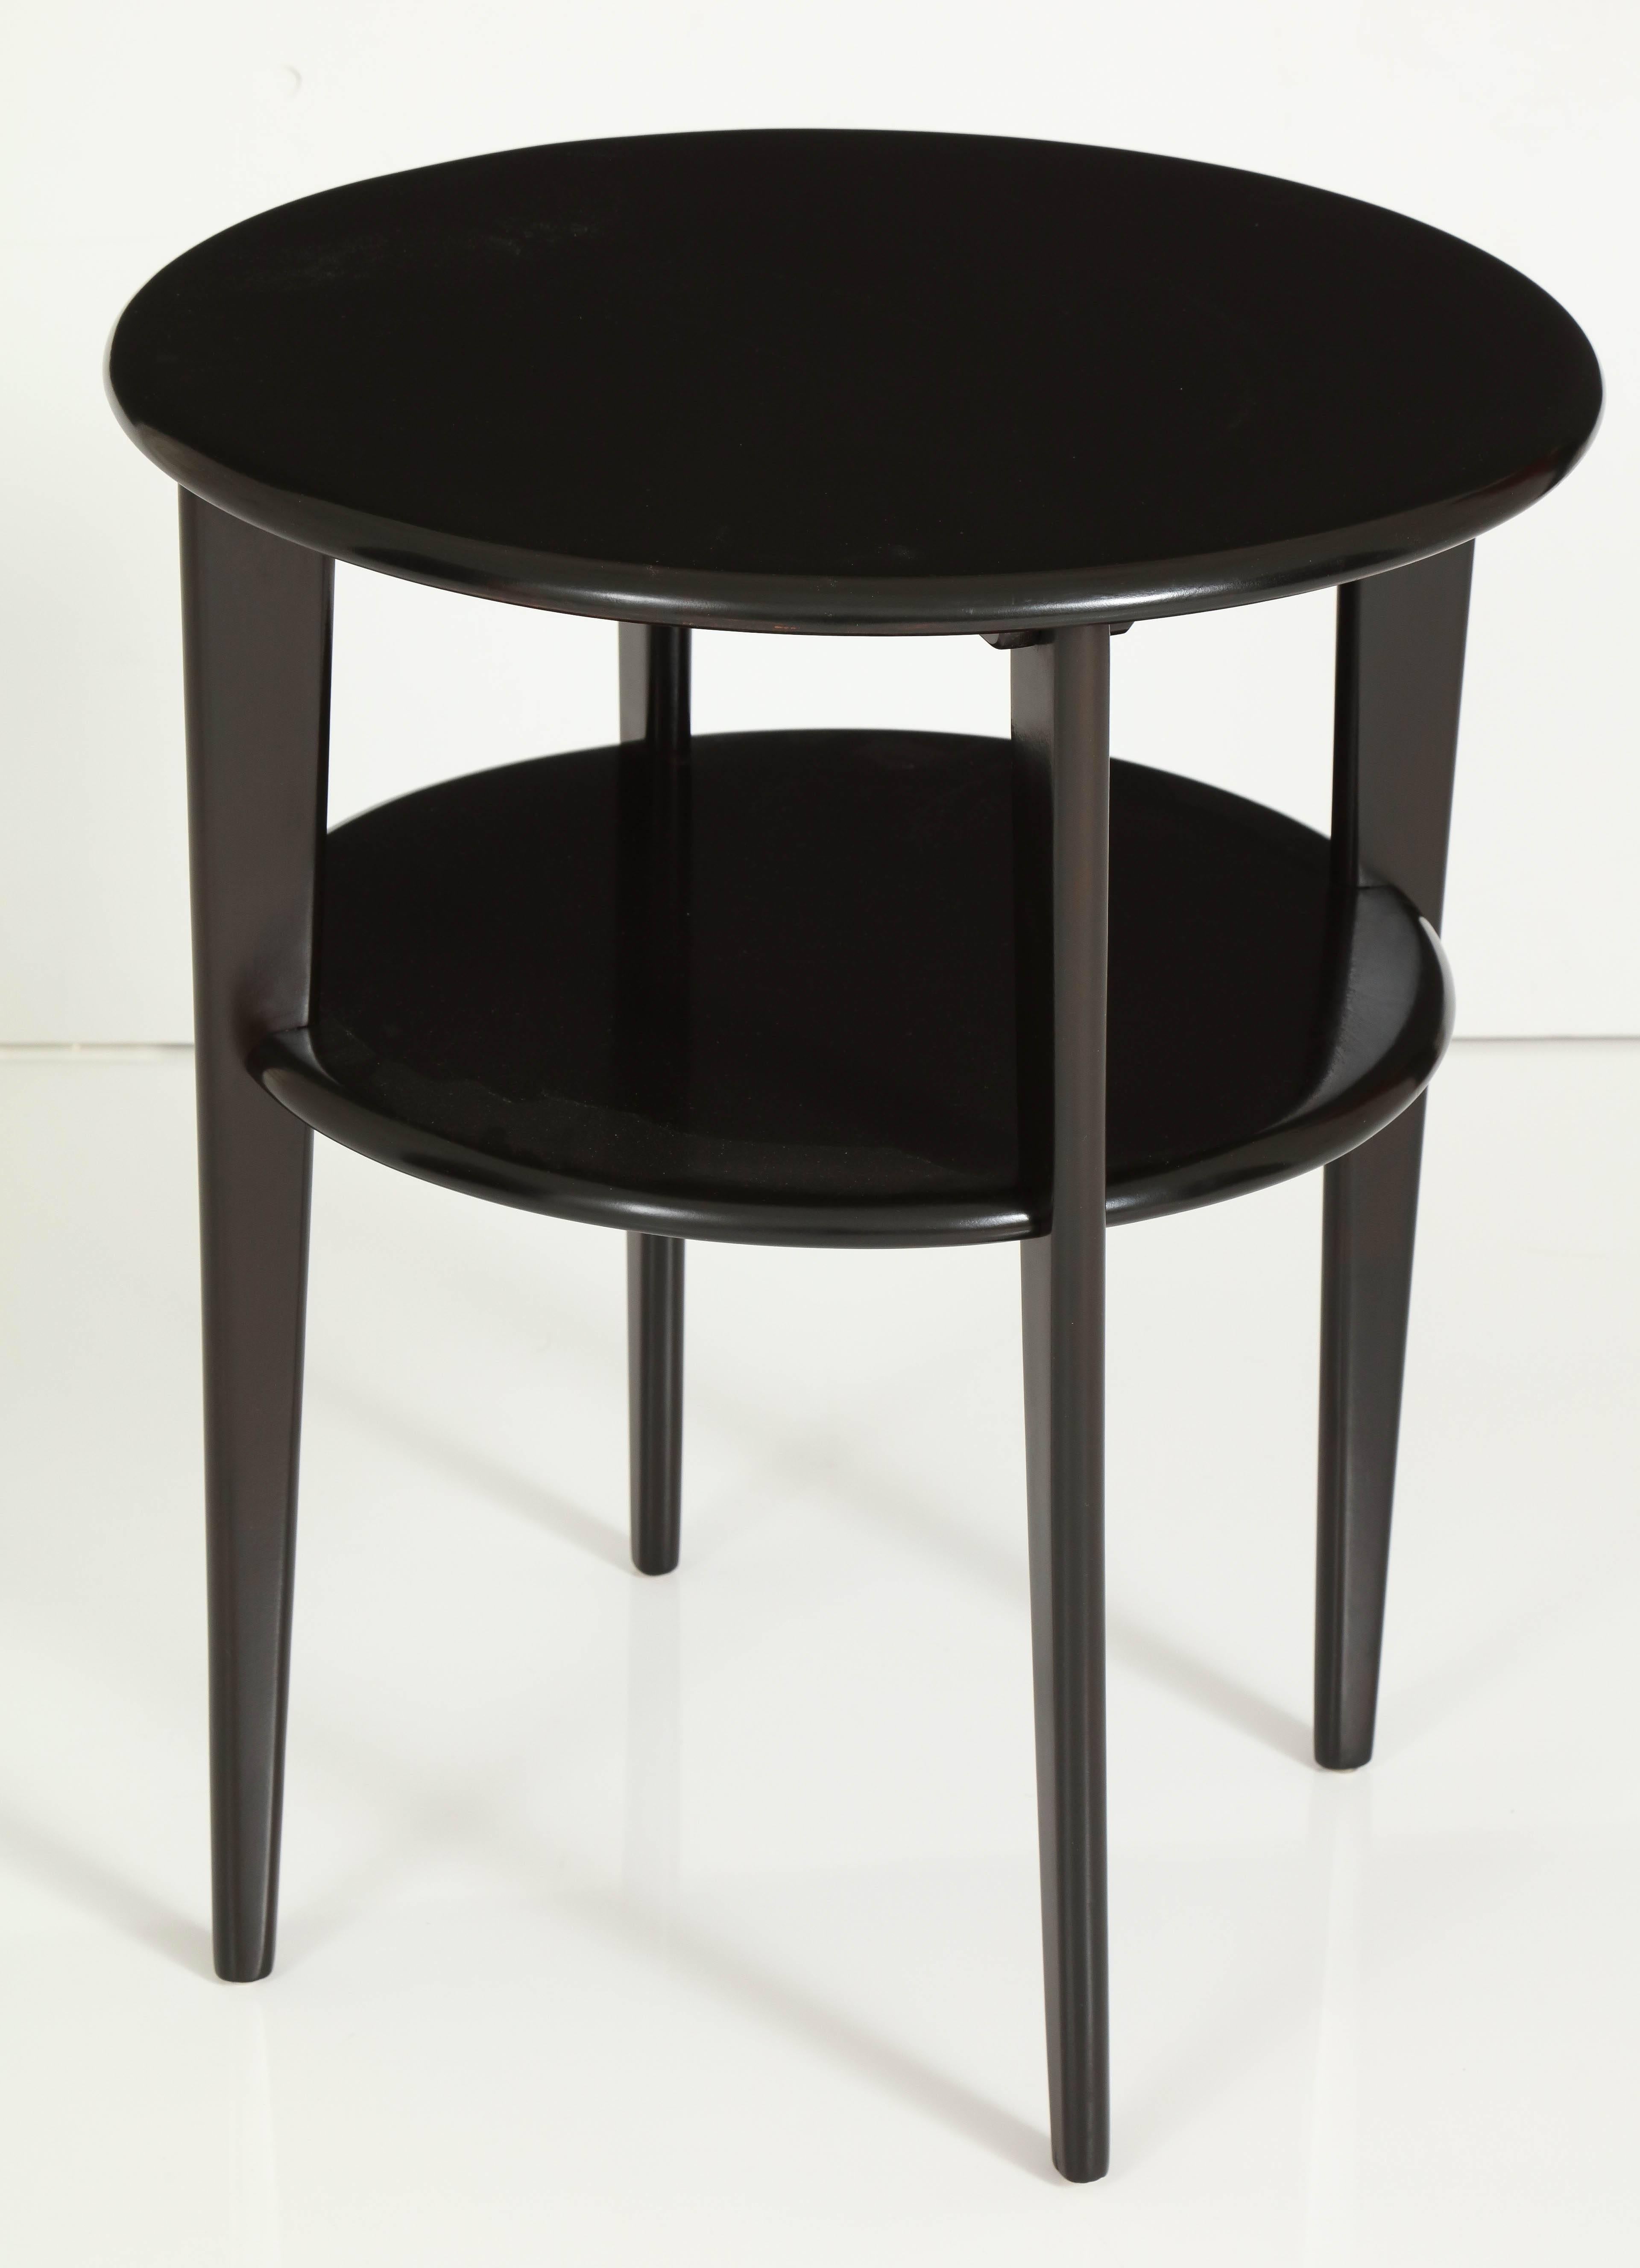 Sable finished maple two-tier round side table in the manner of Russel Wright or Heywood Wakefield, circa 1950.